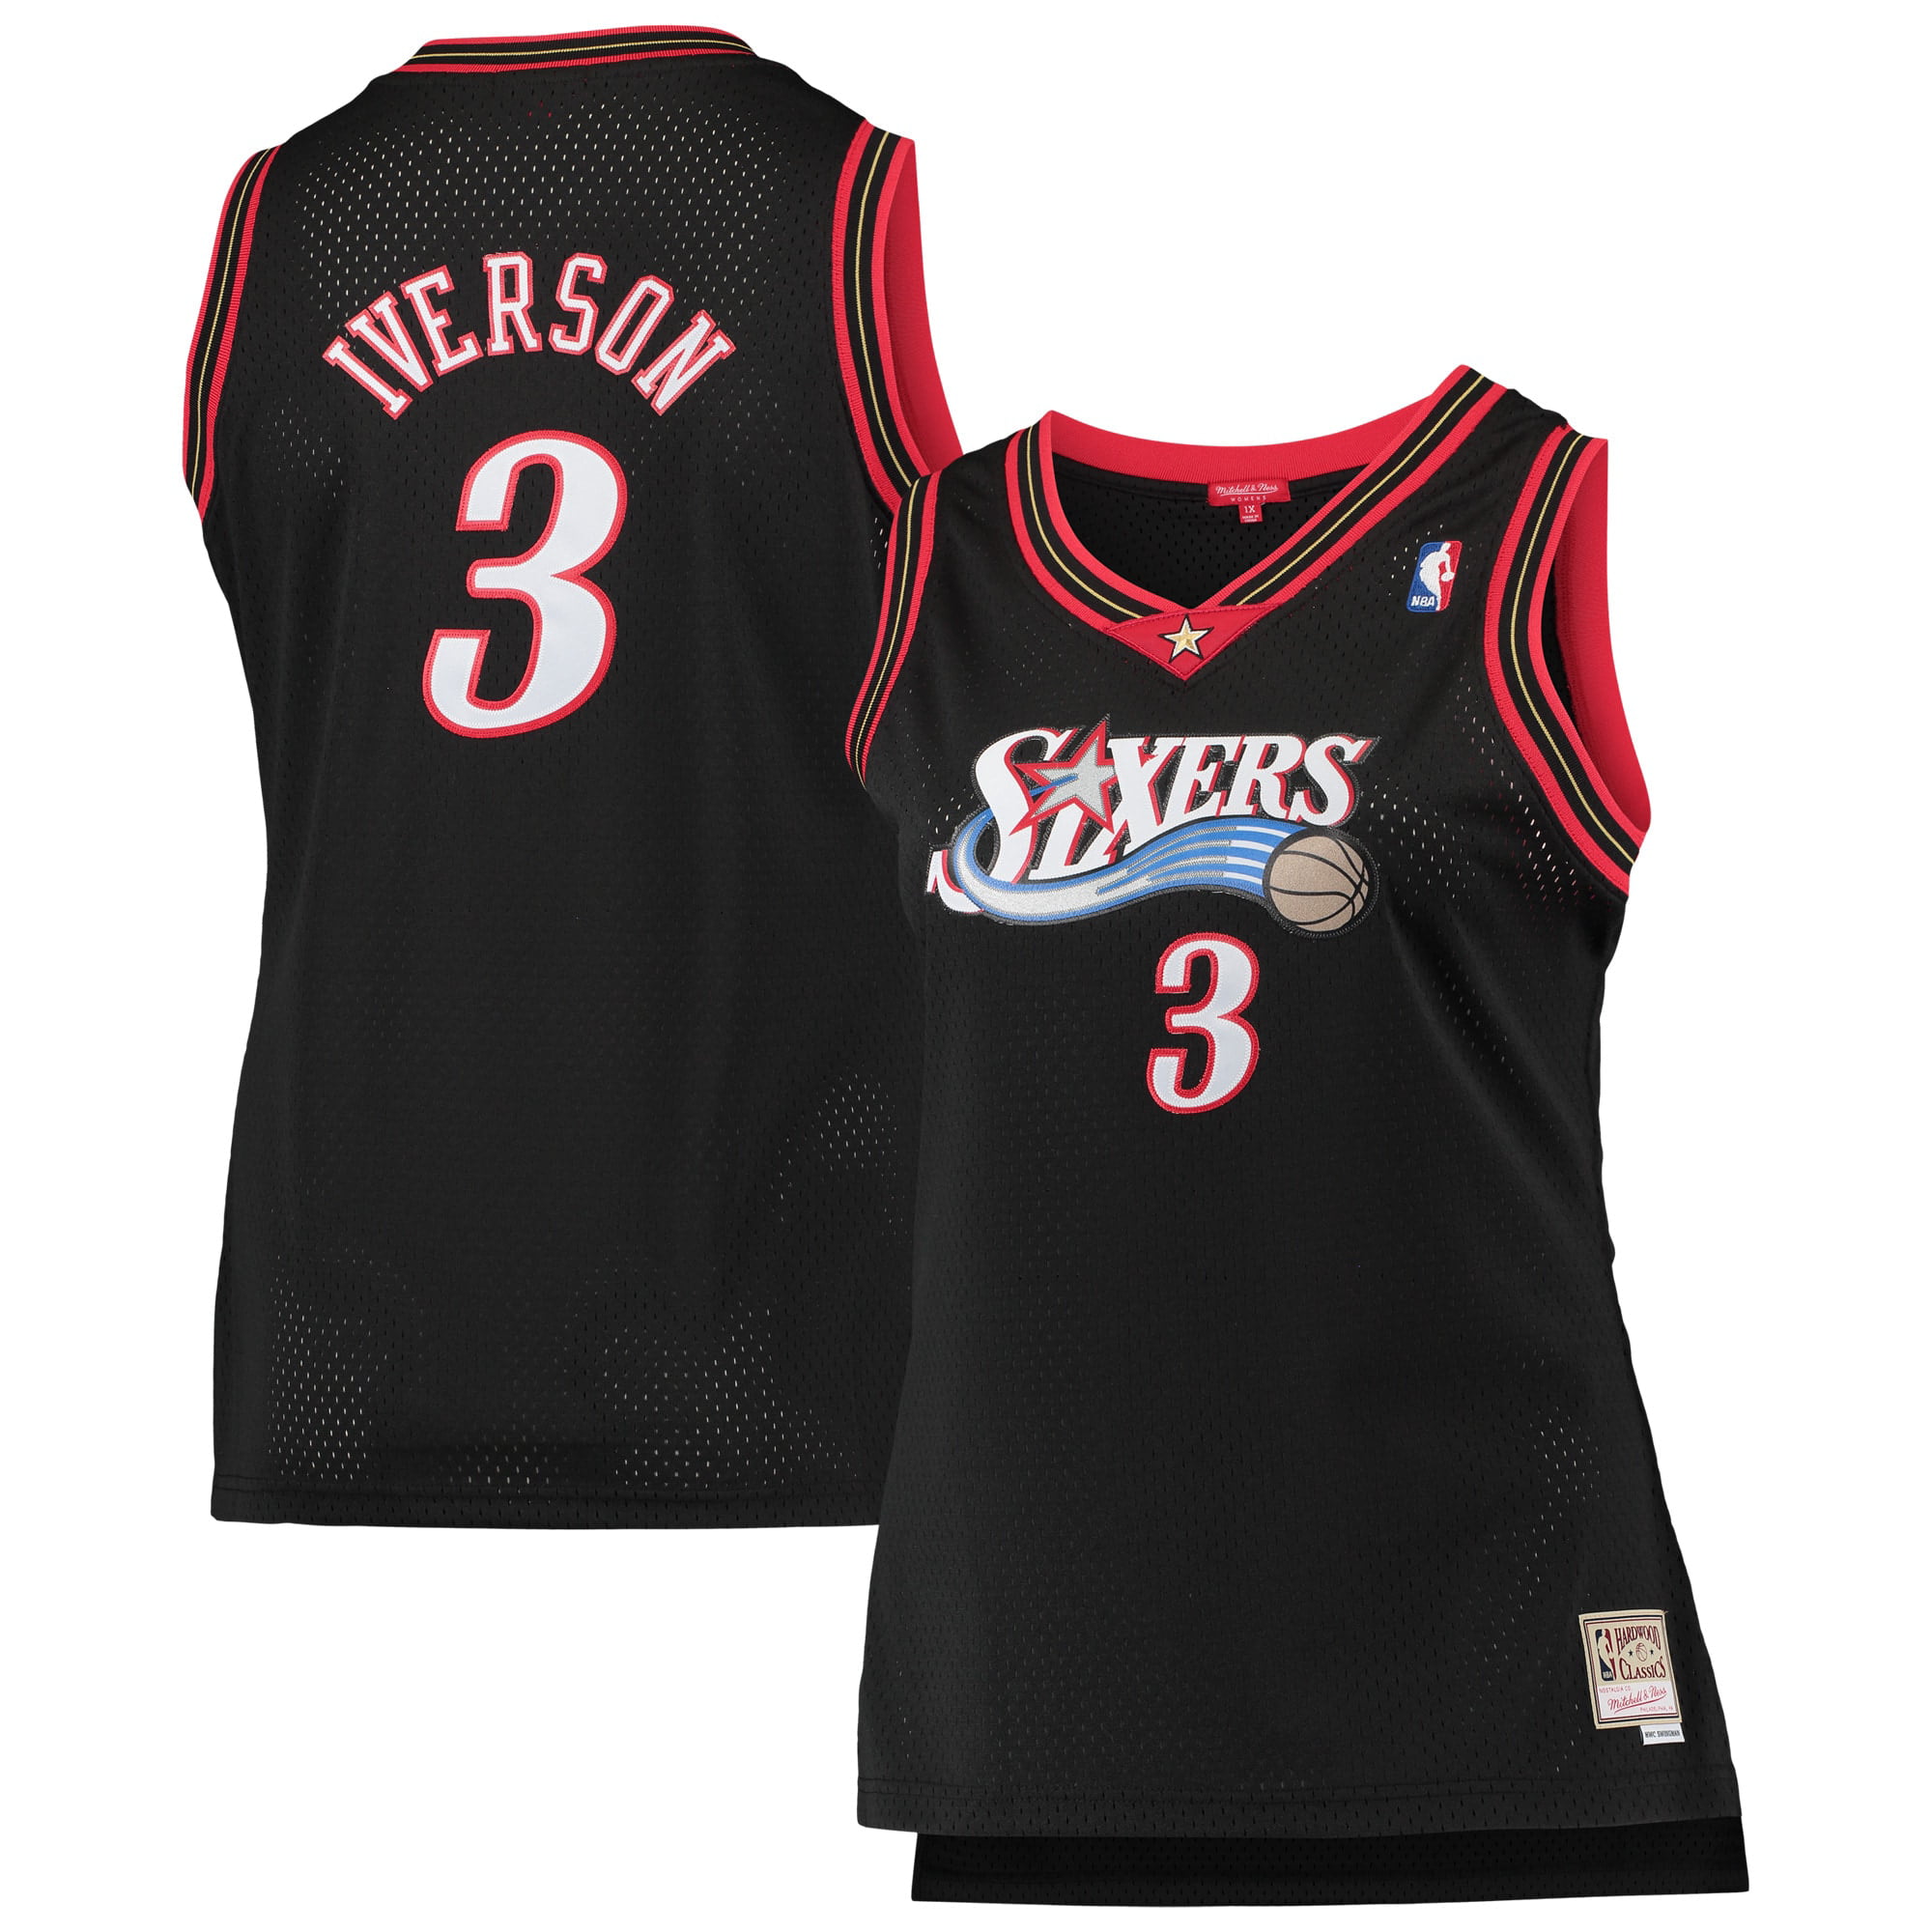 womens iverson jersey